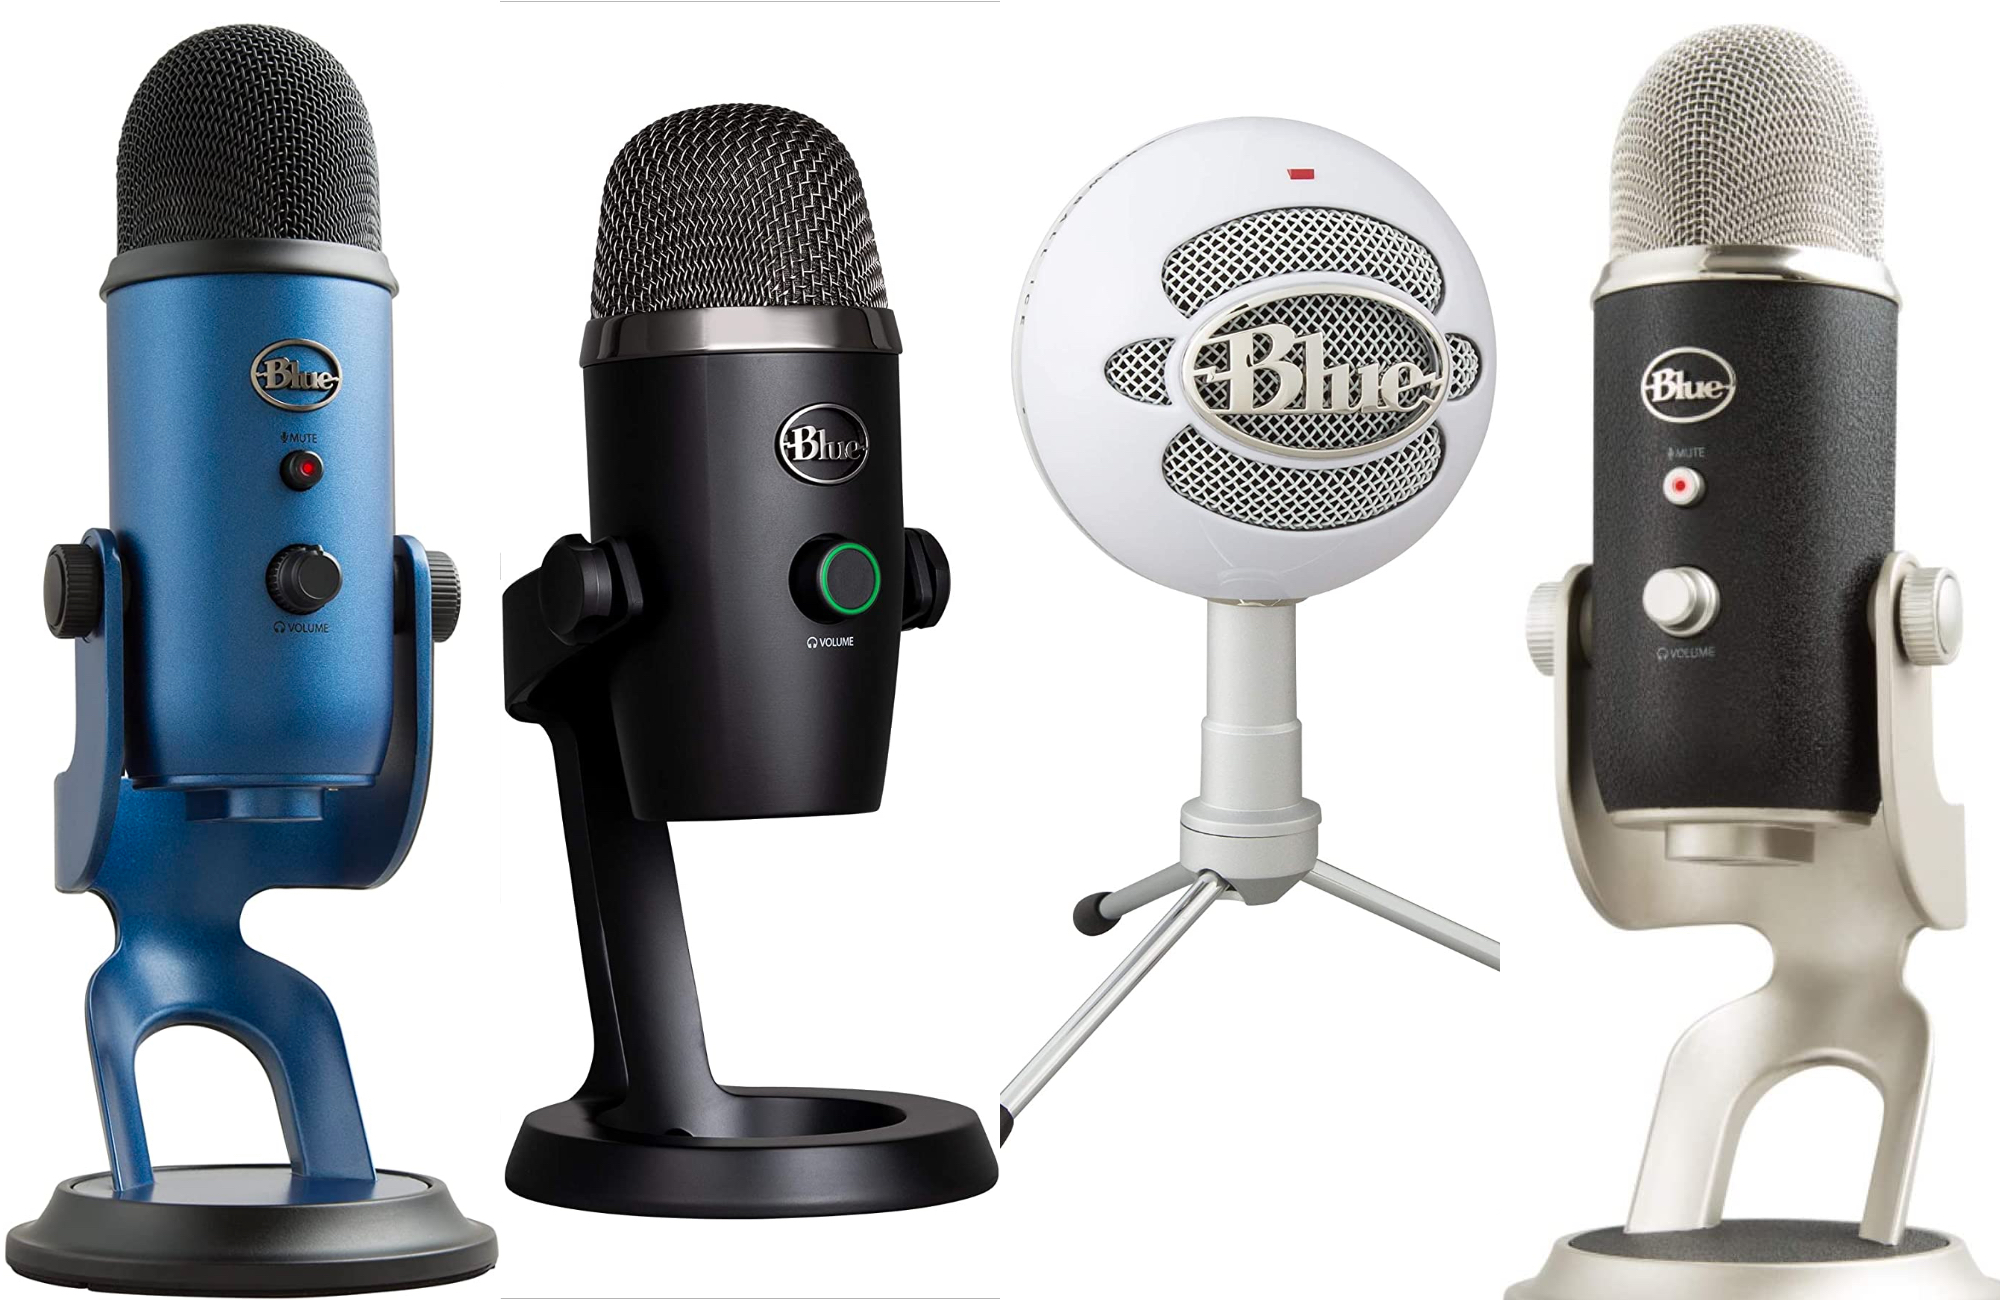 Save $50 on Blue Yeti X USB mics during early Black Friday | Popular Science